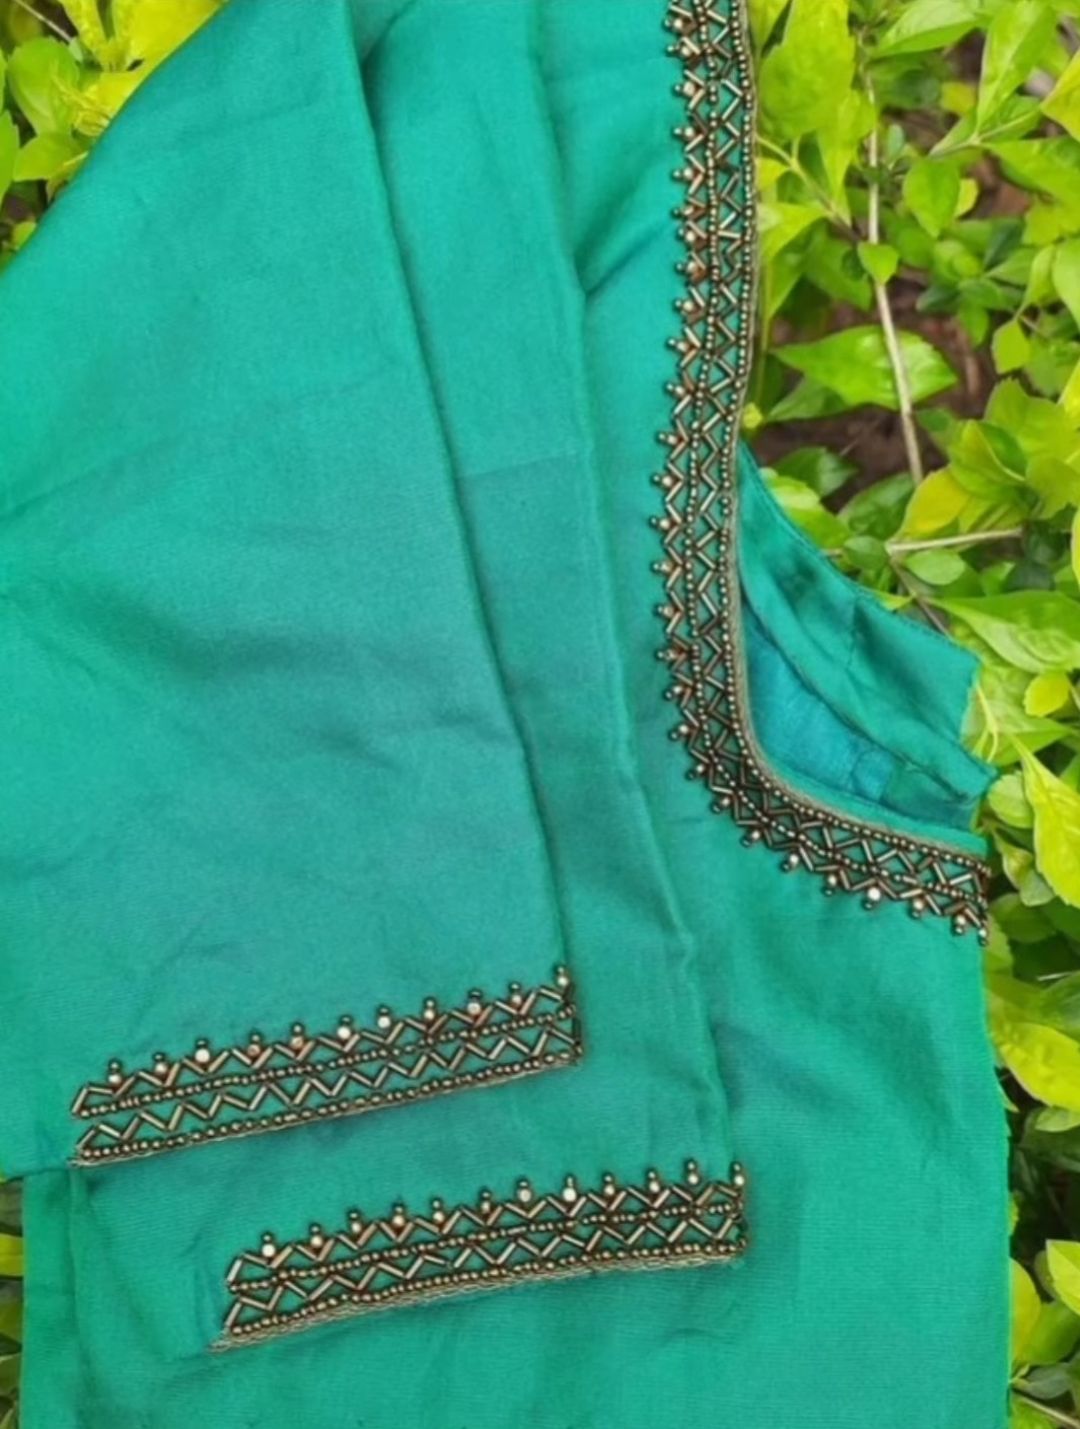 Blouse embroidery designs 